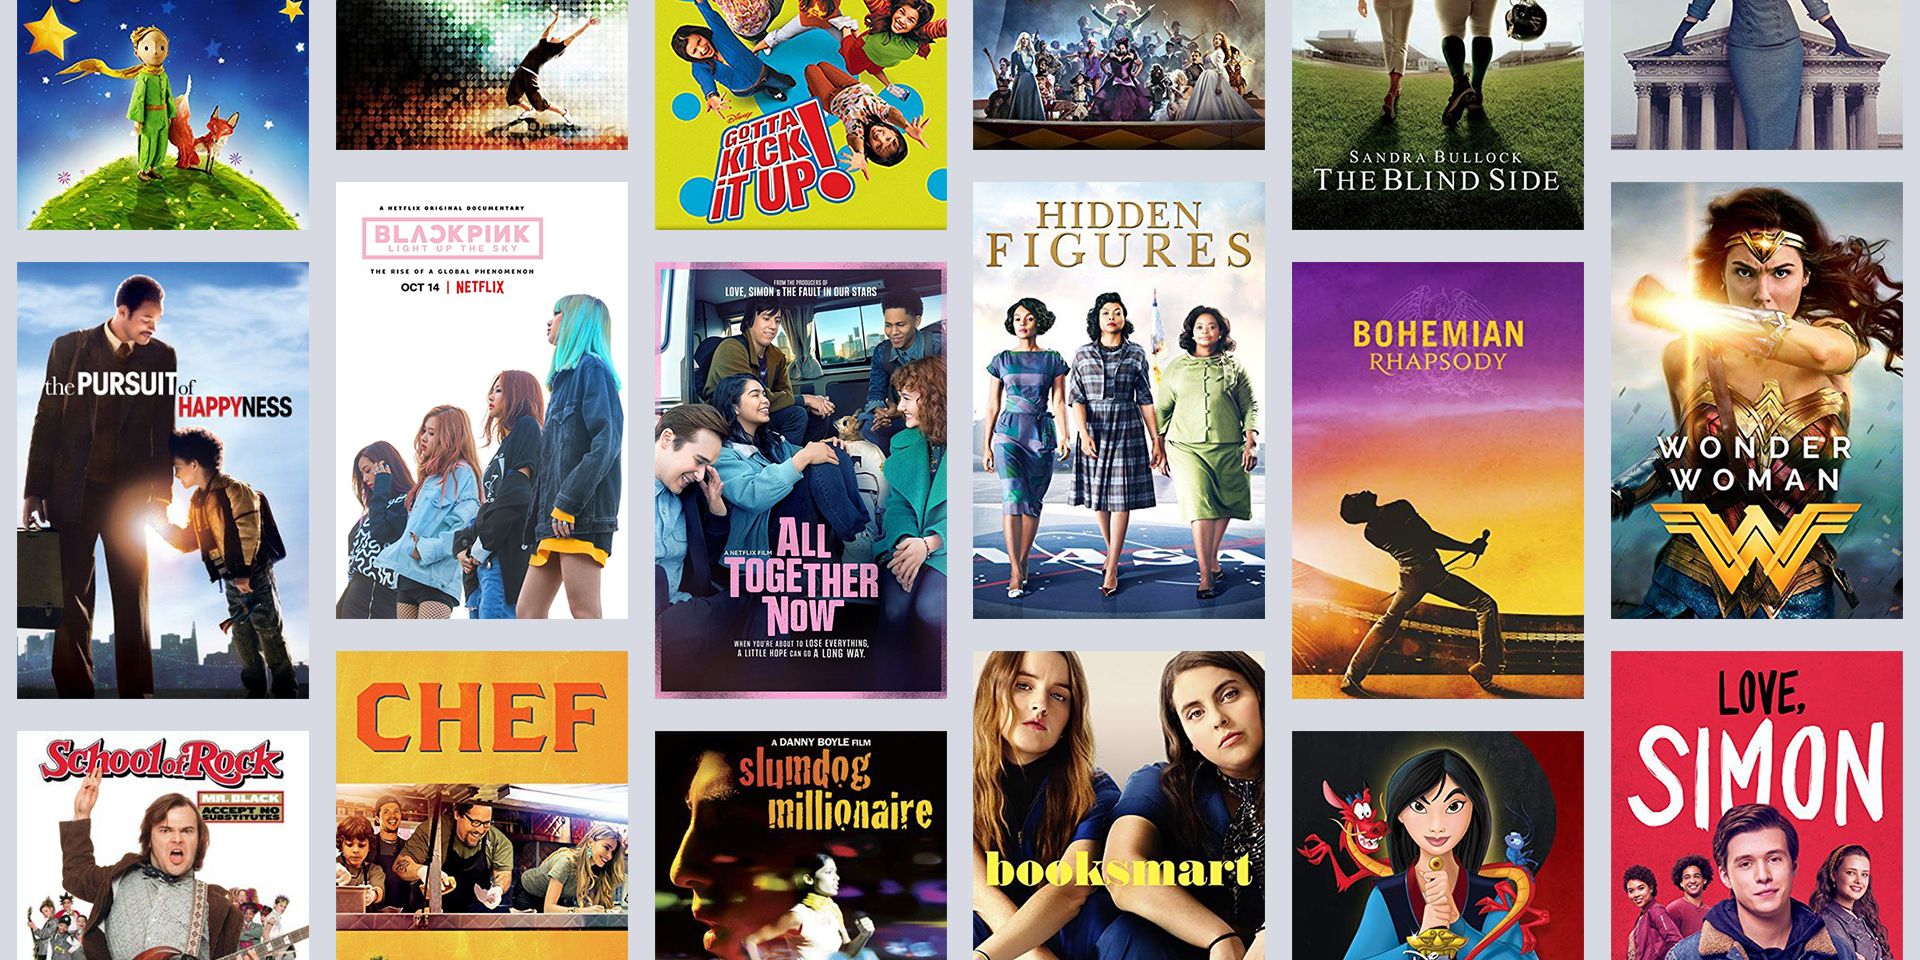 42 Best Inspirational Movies – Inspiring Movies to Make You Feel Happy